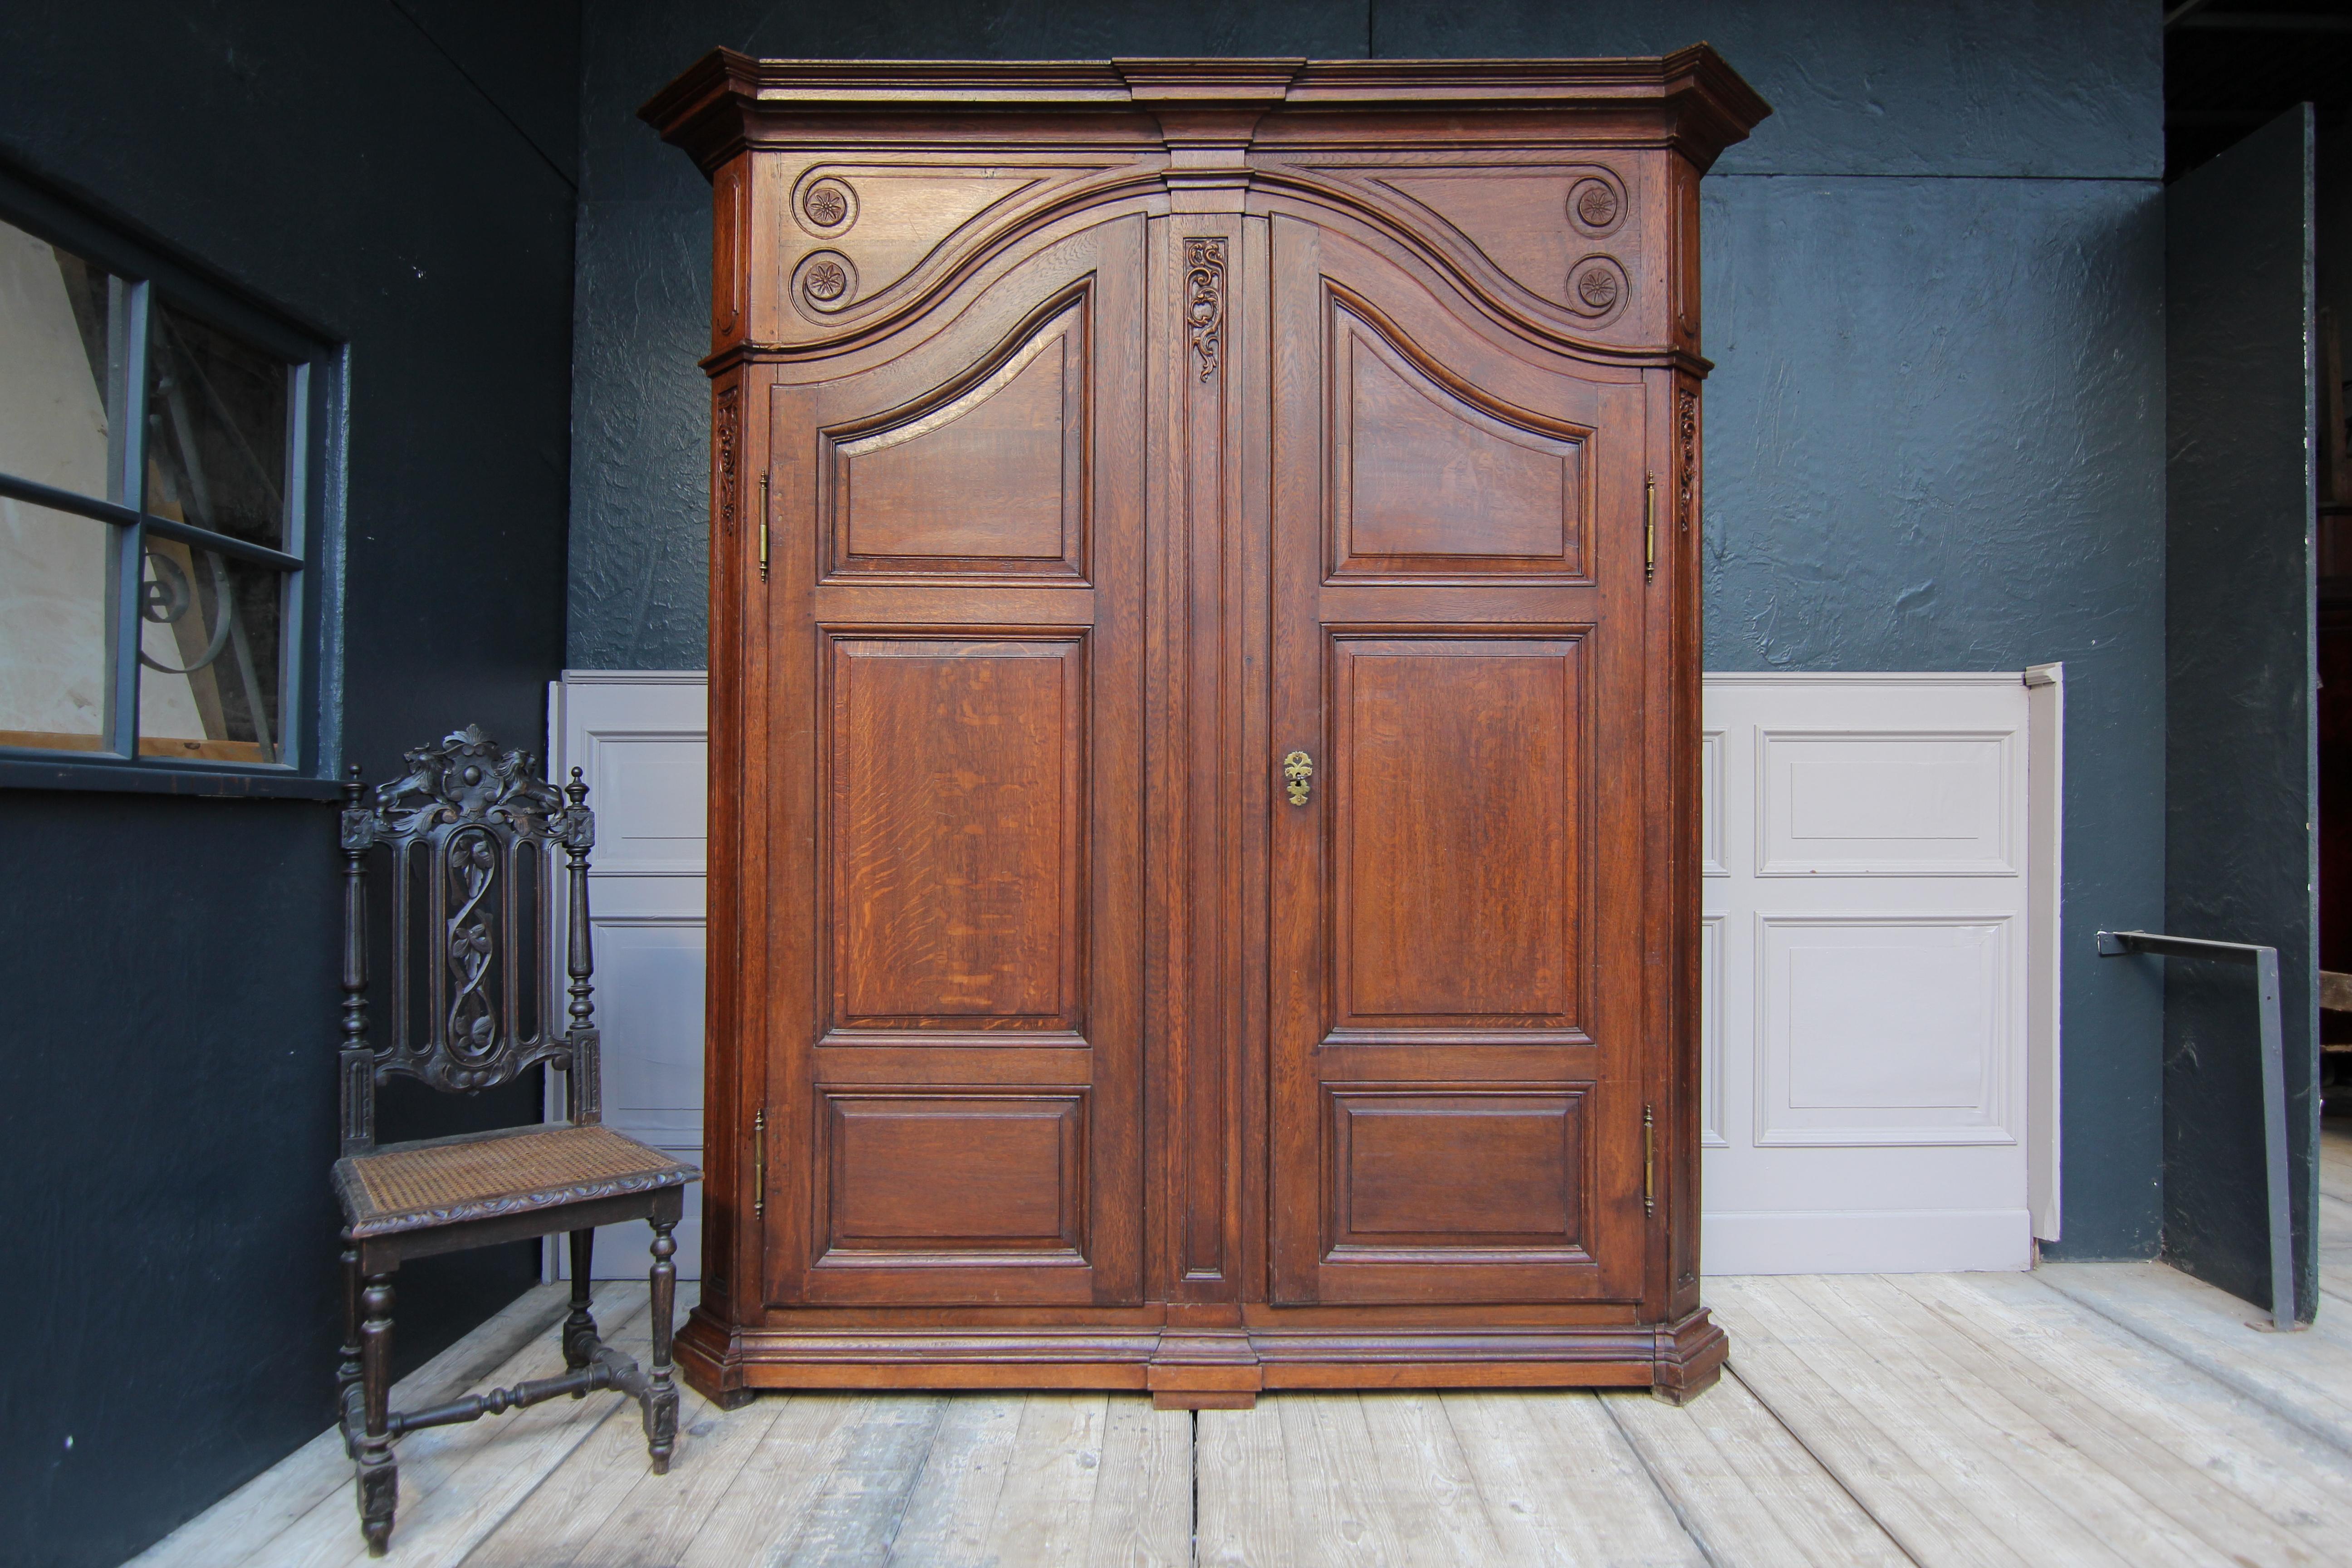 A late 19th century Belgian wardrobe or cabinet made of oak.
Inside painted black and equipped with 4 shelves. Alternatively, a clothes rail can be attached.

The cabinet can be dismantled into several parts.